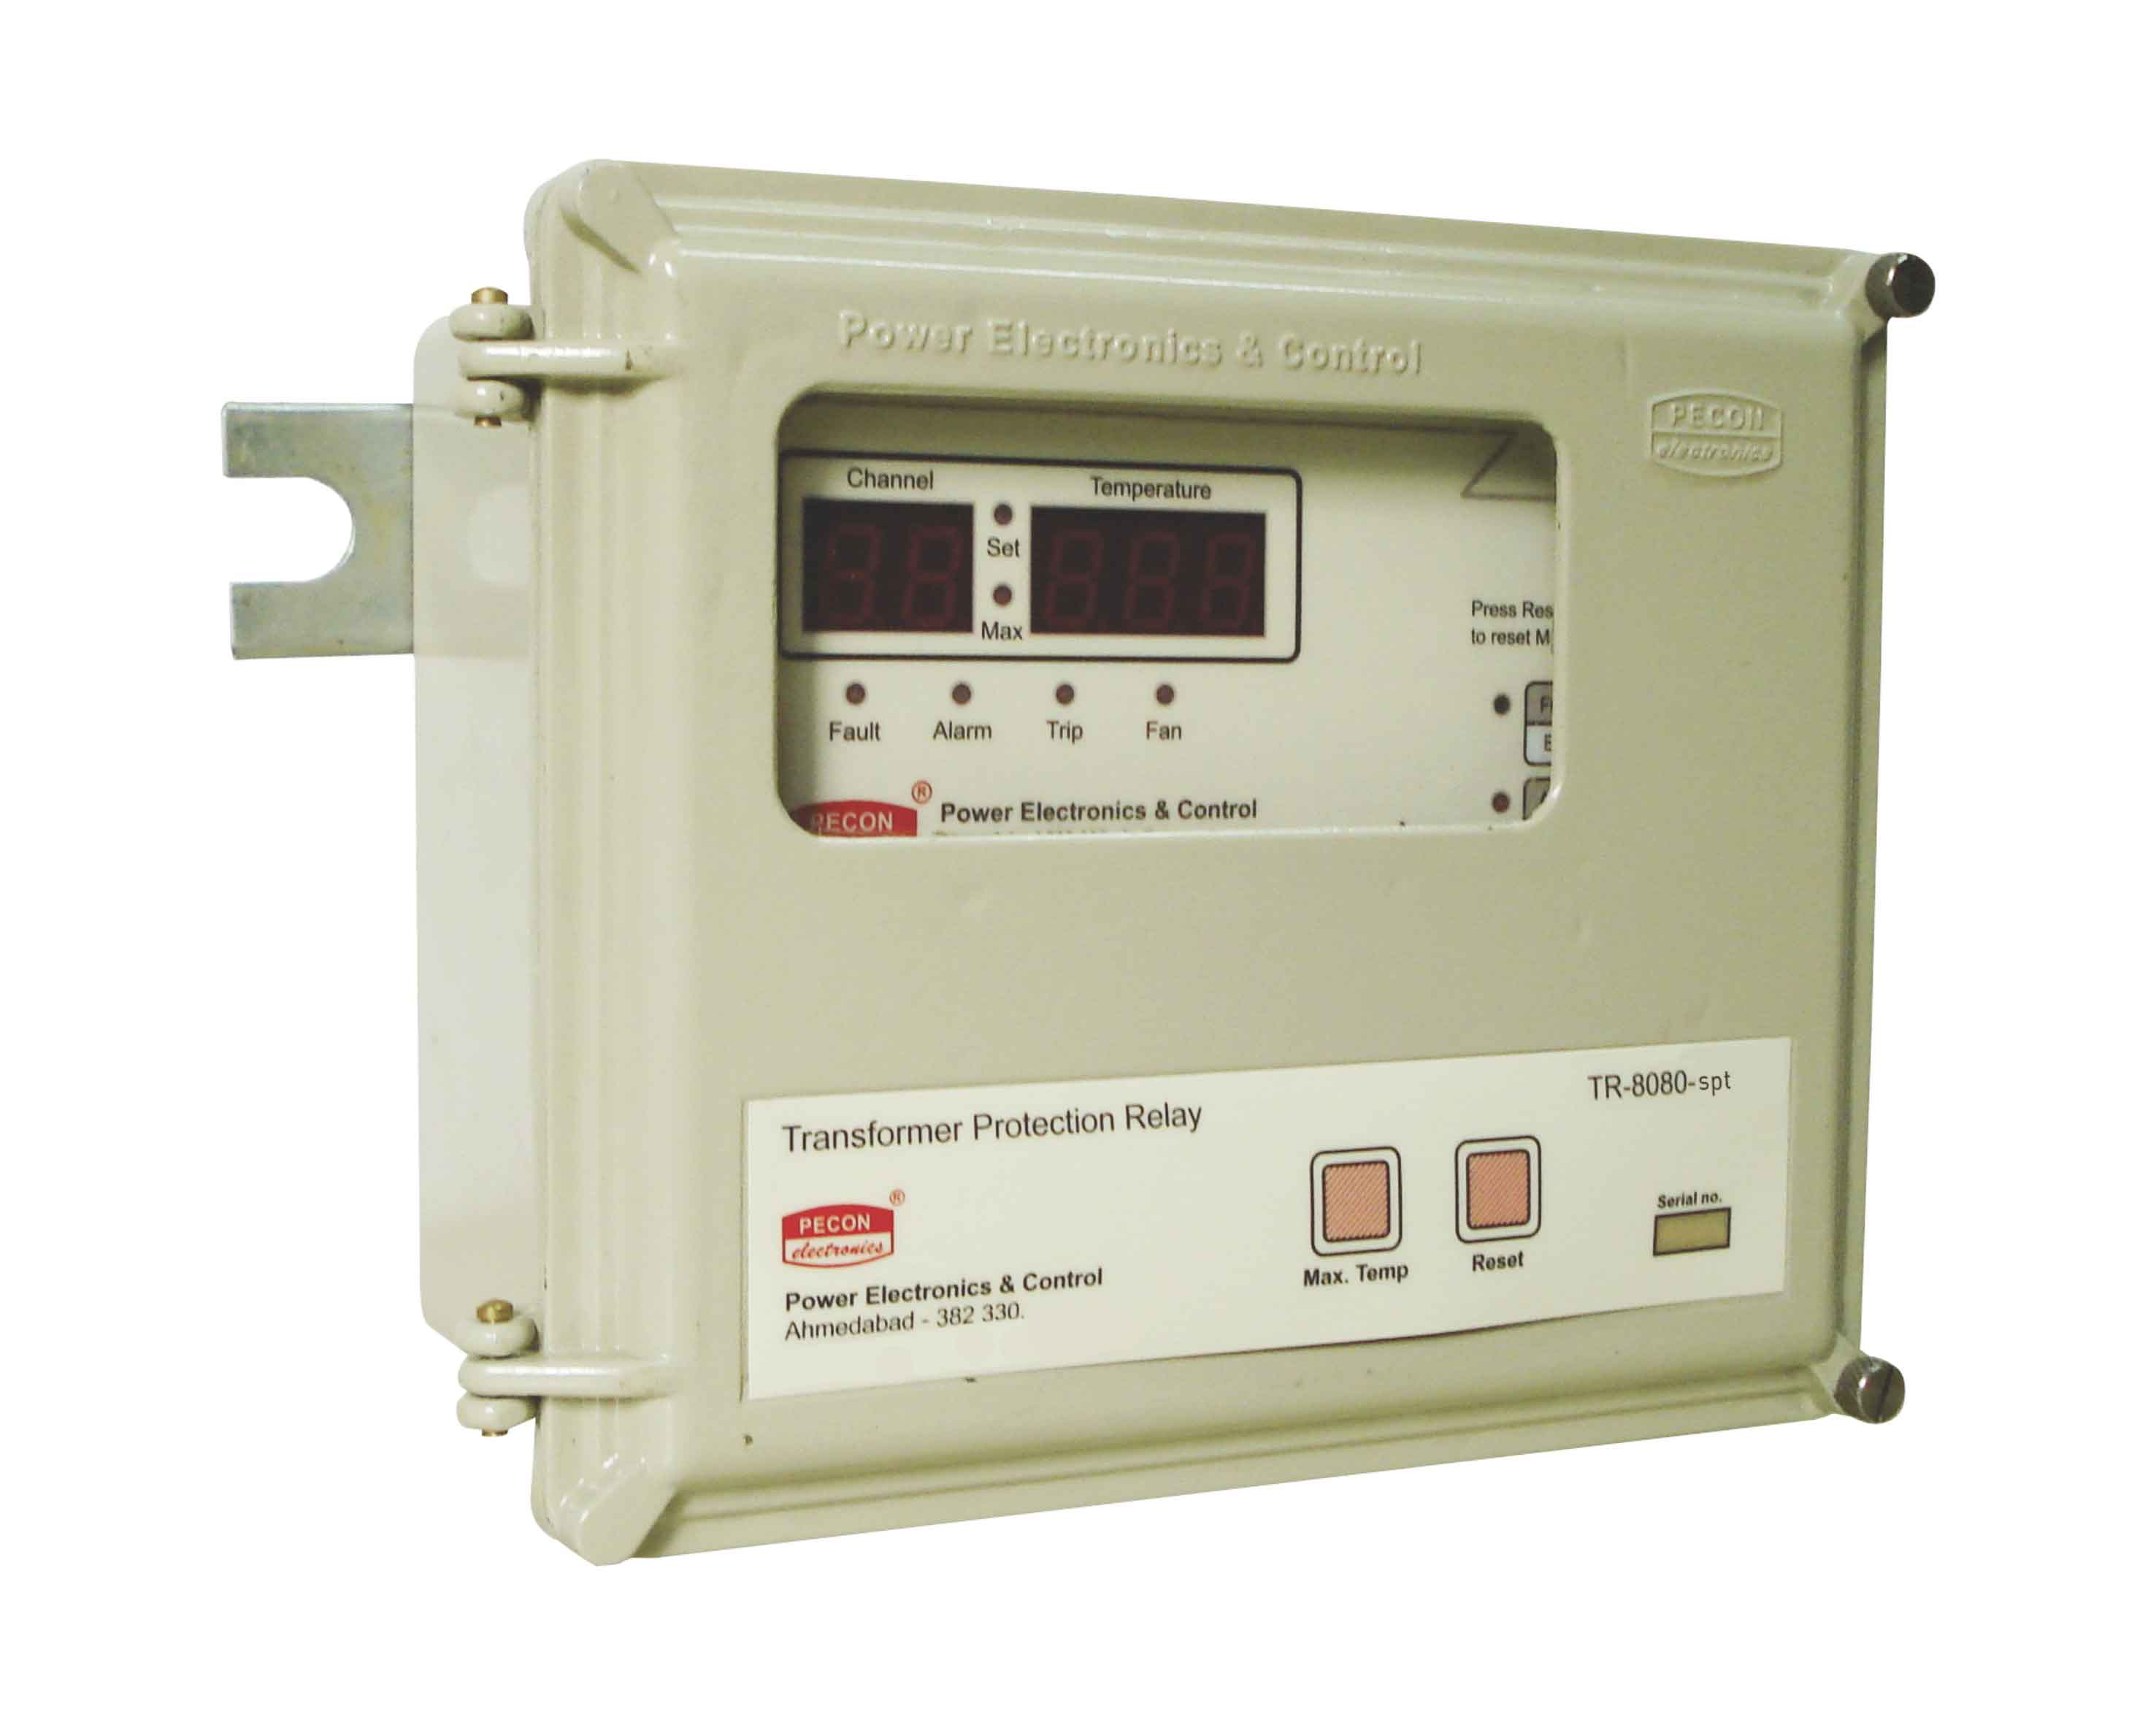 TR 8080 and spt 04 four channel temperature scanner with 4 to 20 mA and RS 485 remote output Transformer Protection Relay